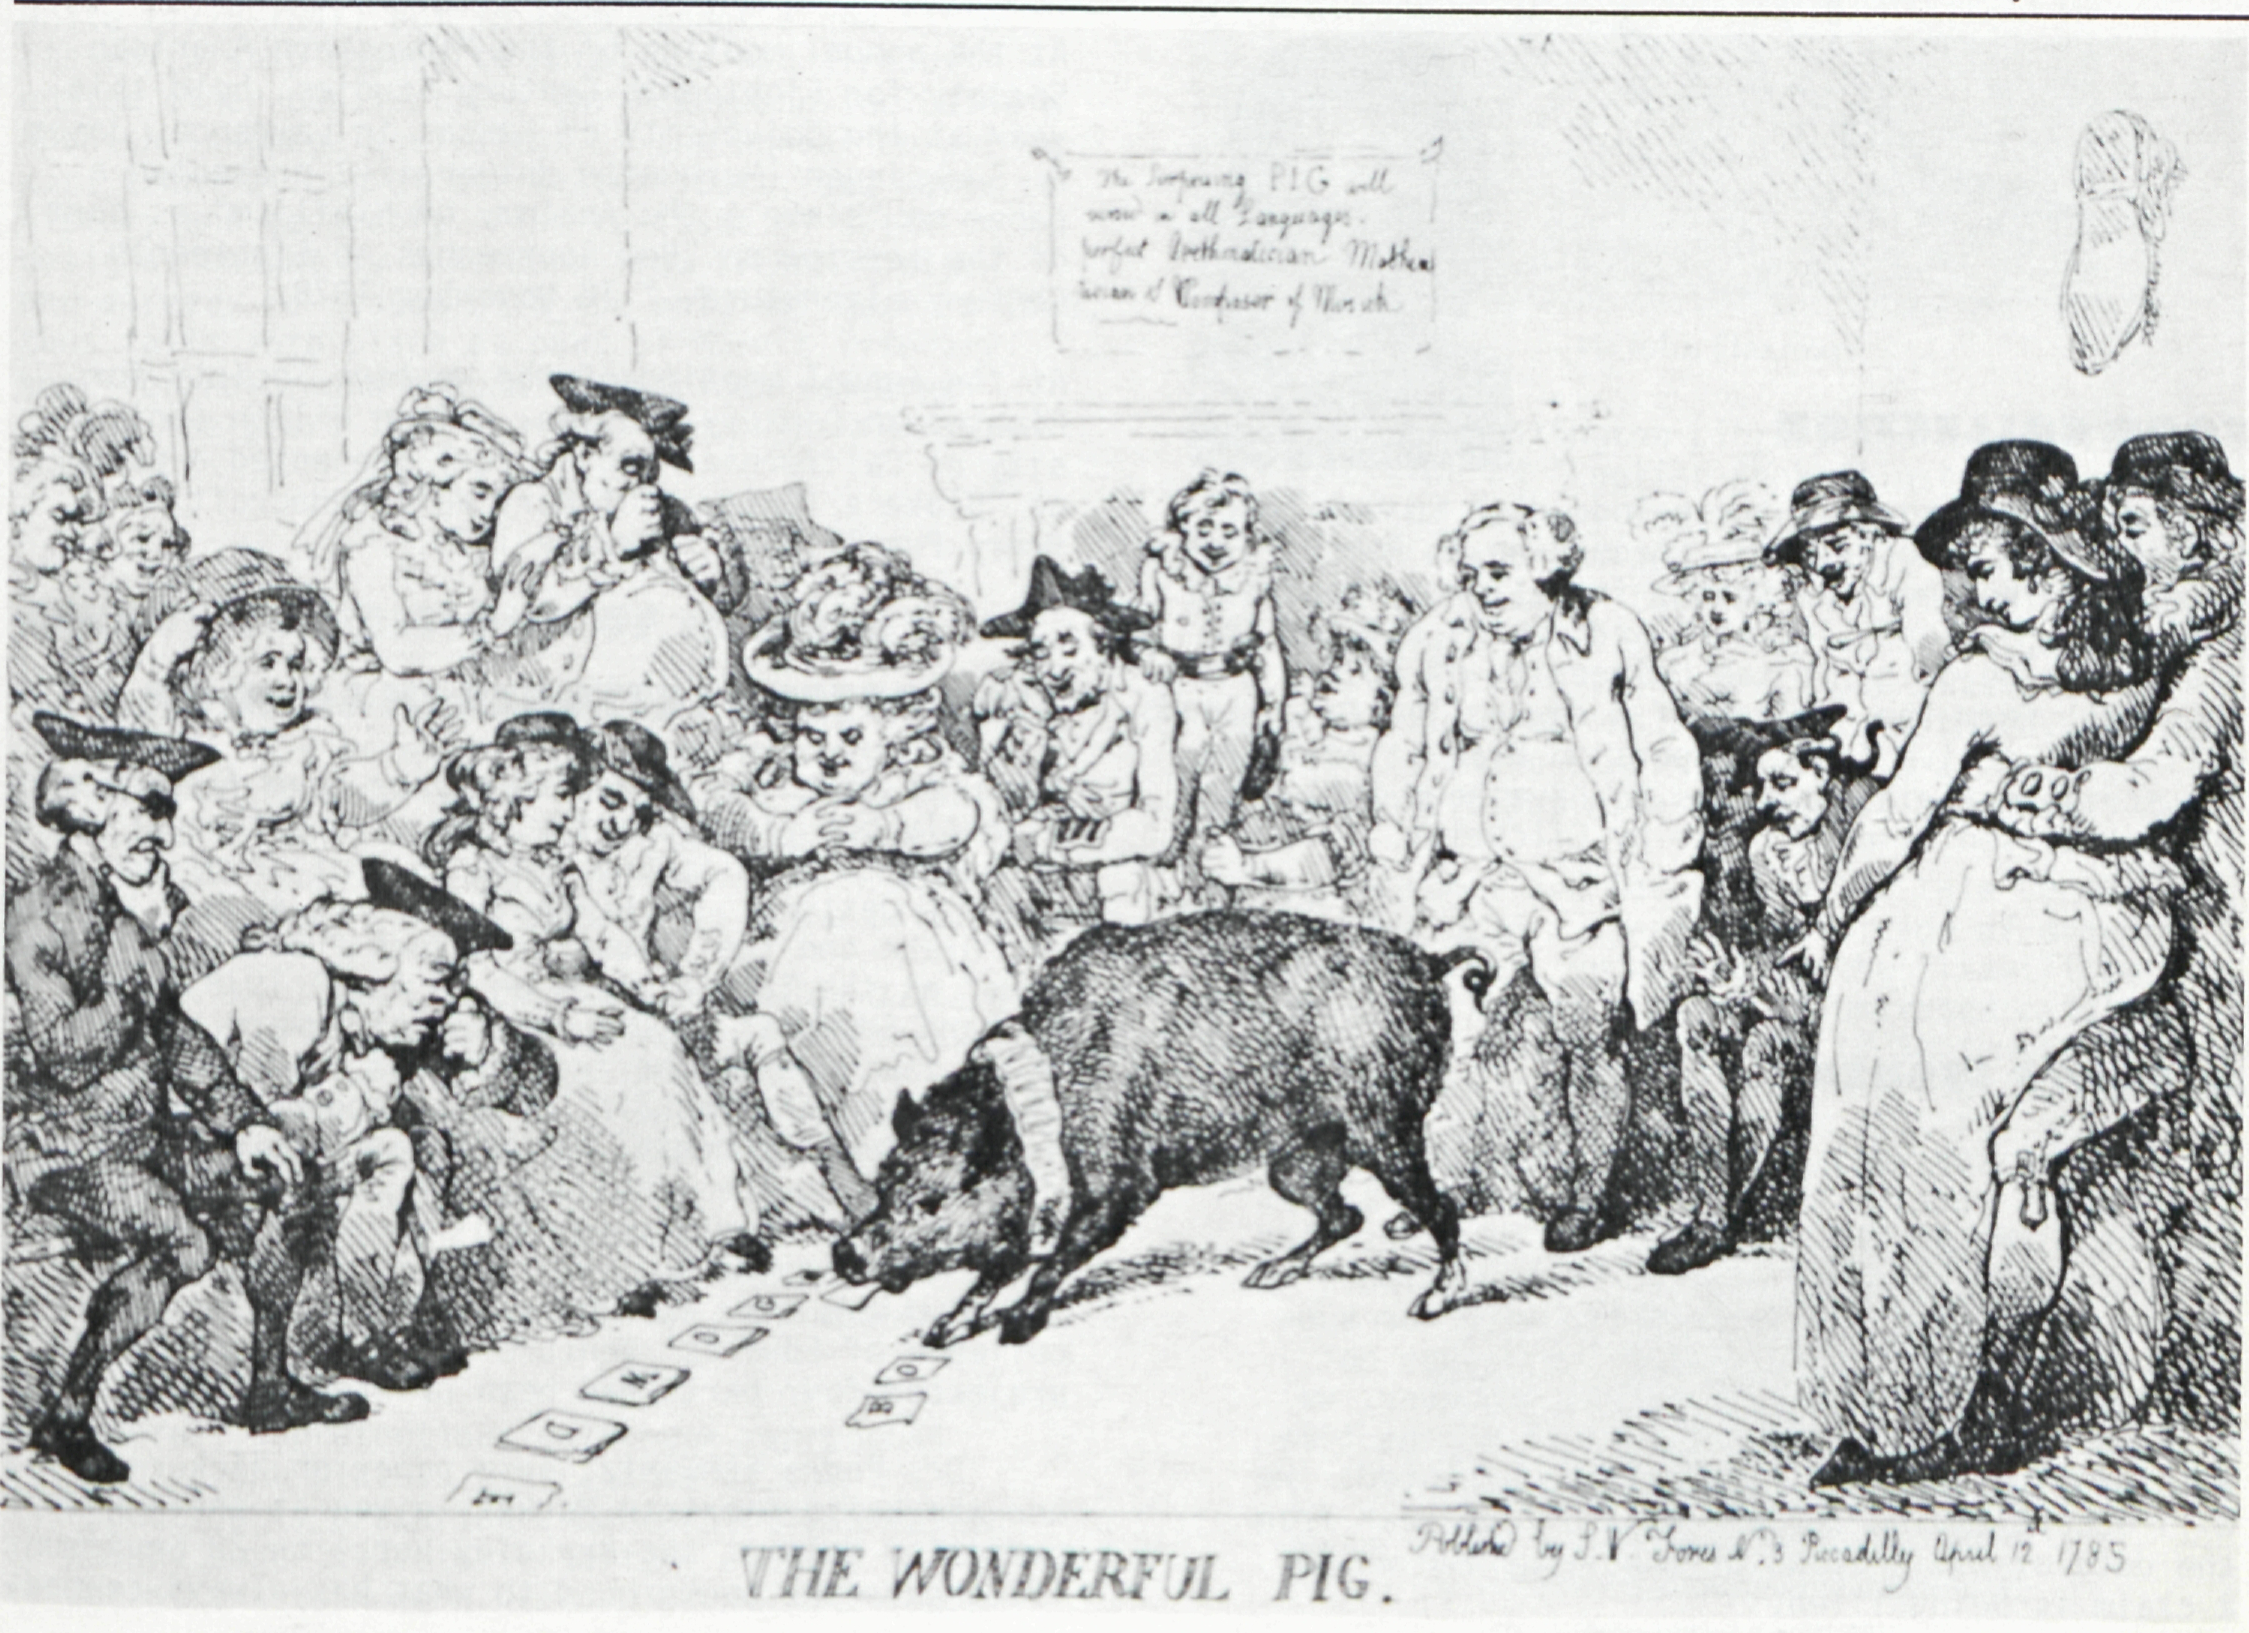 The Surprising PIG well
	versed in all Languages,
	perfect Arethmatician Mathematician
	& Composer of Musick
	
	G O W D E
	
	B O
	
	THE WONDERFUL PIG.
	
	Publish’d by S.V. Jones No. 3 Piccadilly April 12 1785